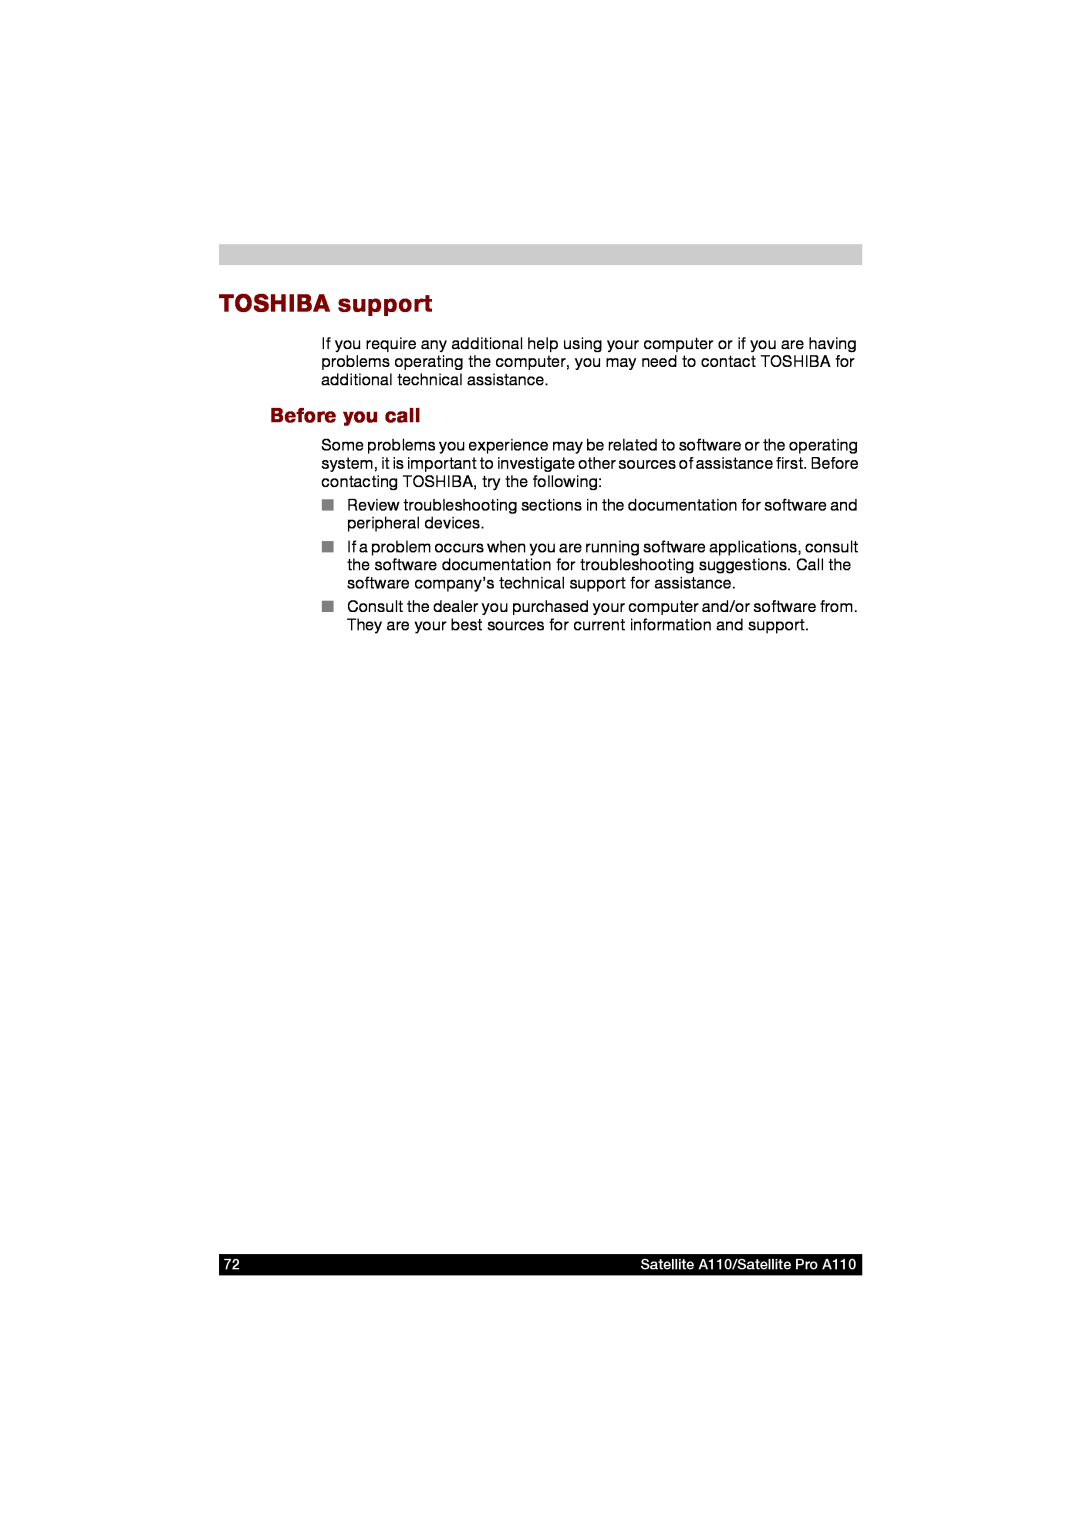 Toshiba A110 user manual TOSHIBA support, Before you call 